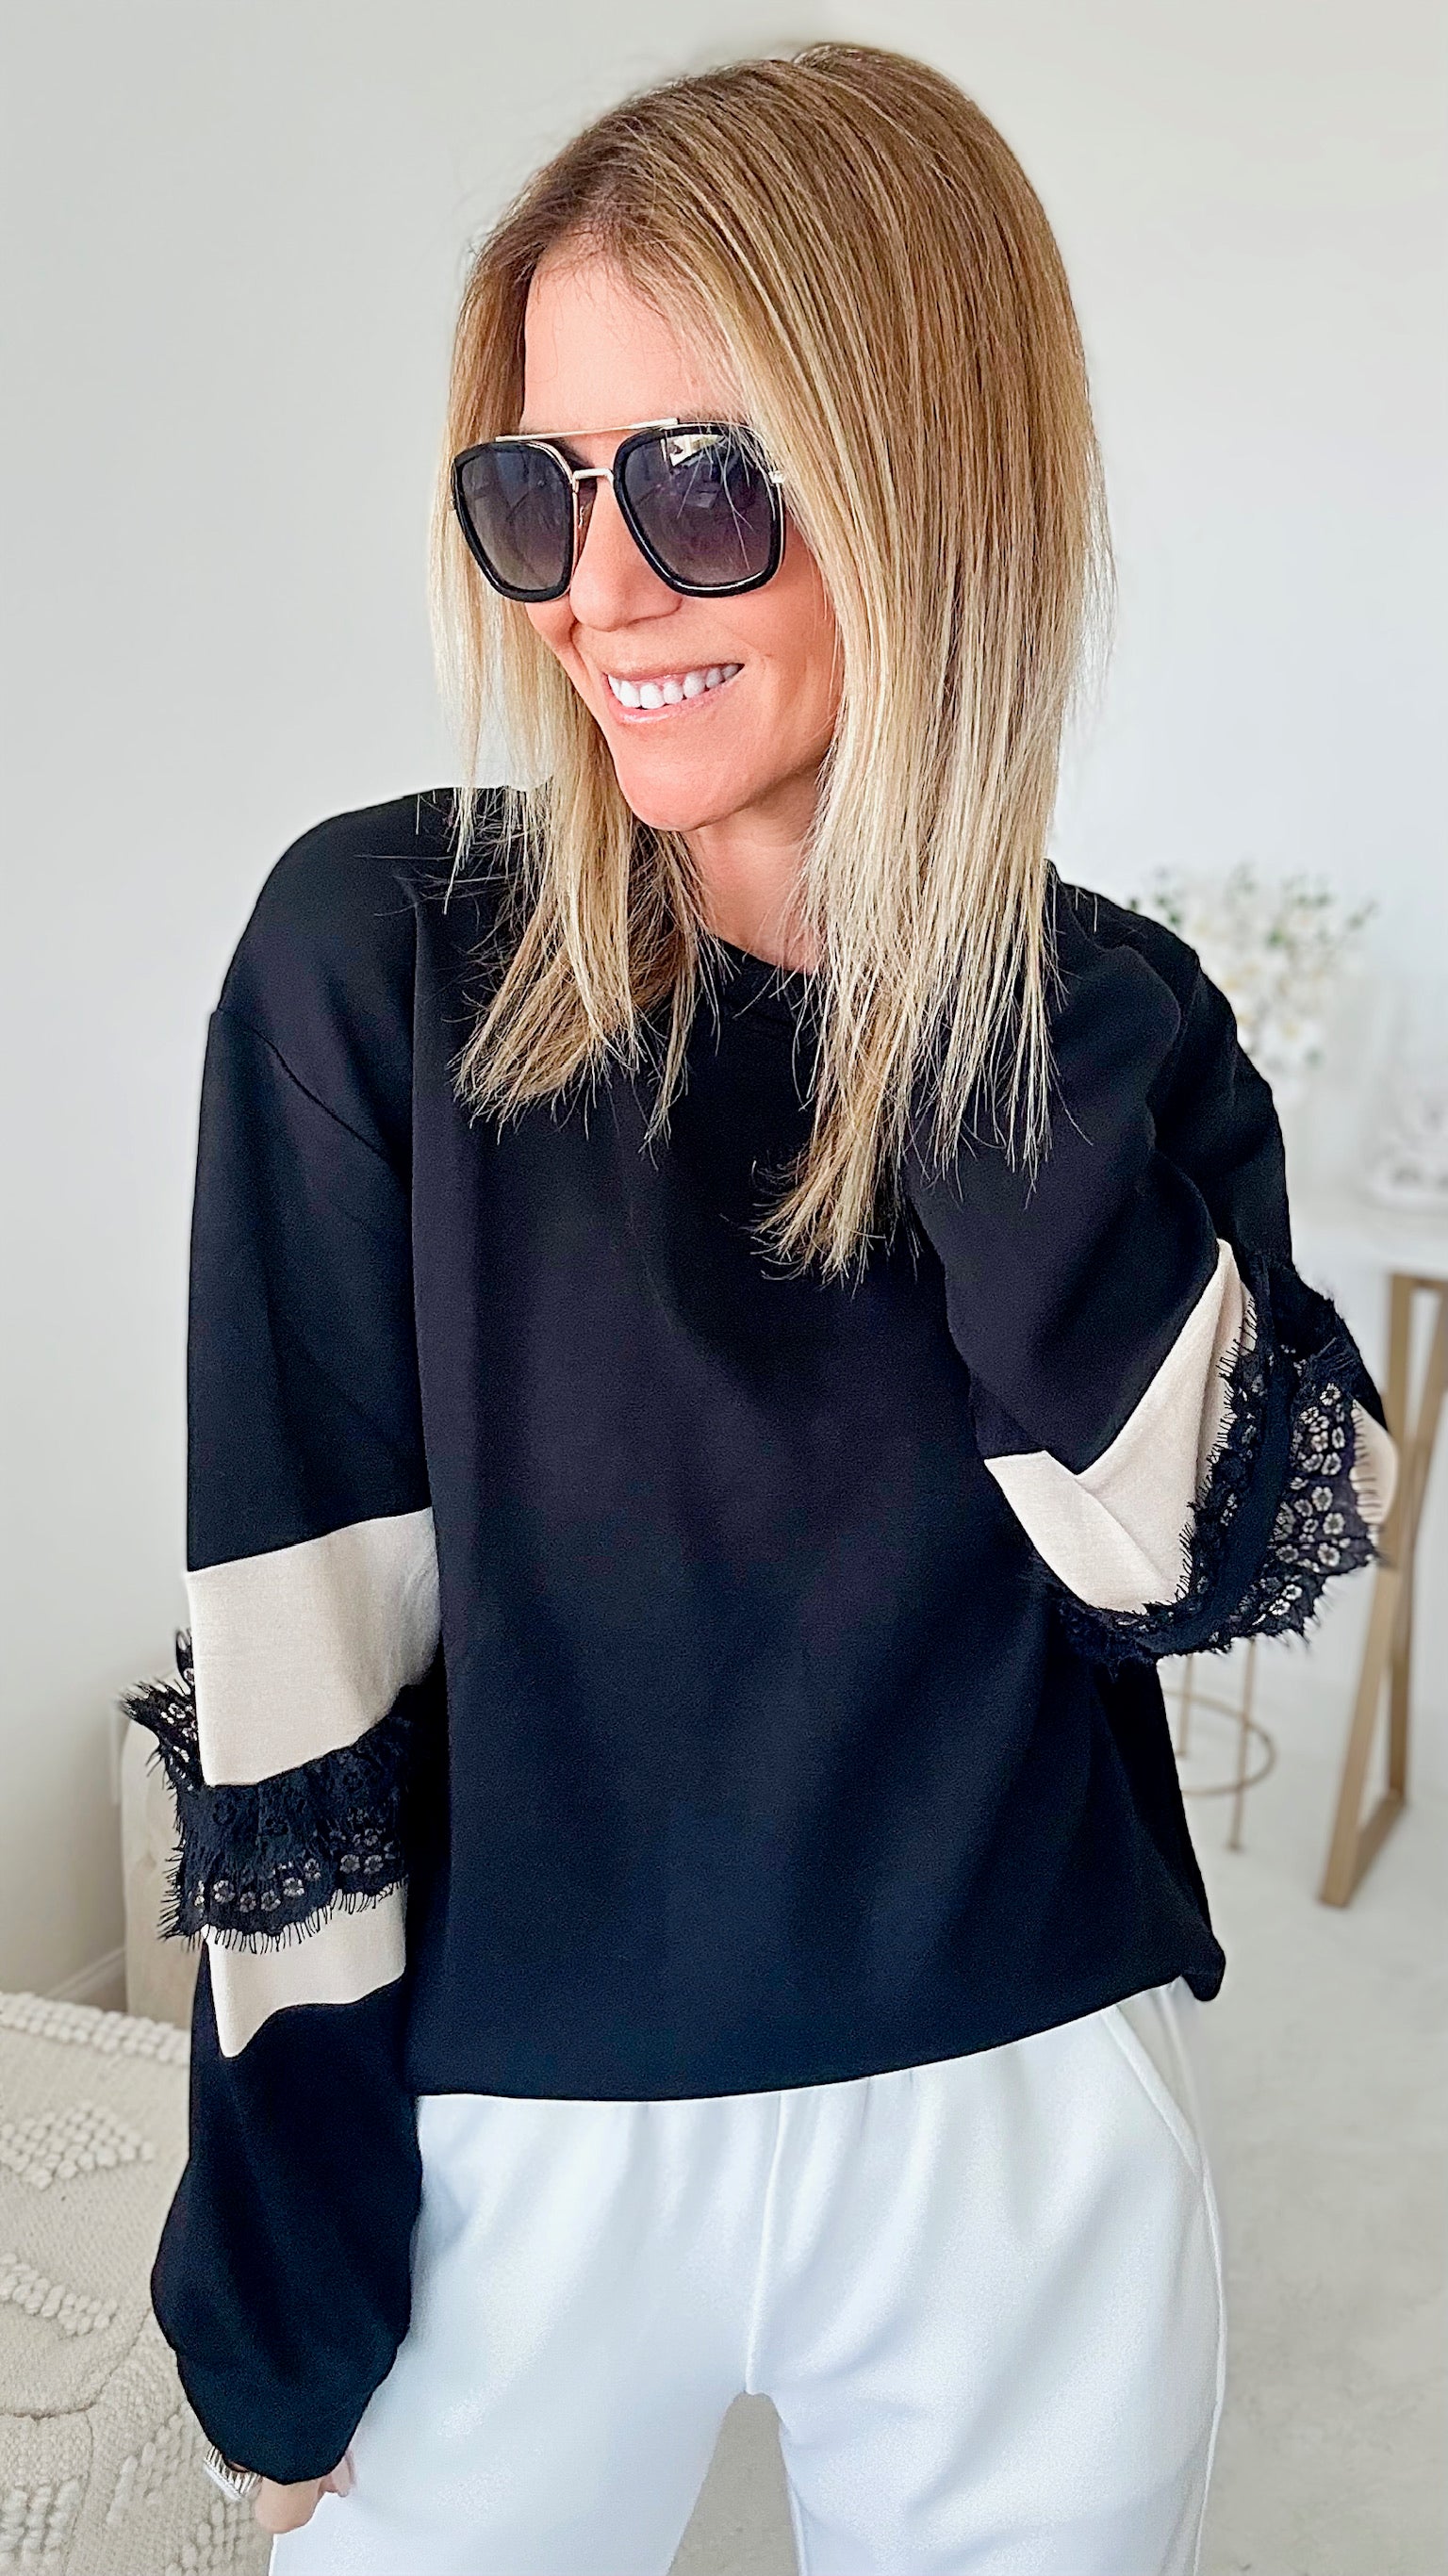 Casual Debutant Lace Sweatshirt - Black-130 Long Sleeve Tops-Joh Apparel-Coastal Bloom Boutique, find the trendiest versions of the popular styles and looks Located in Indialantic, FL